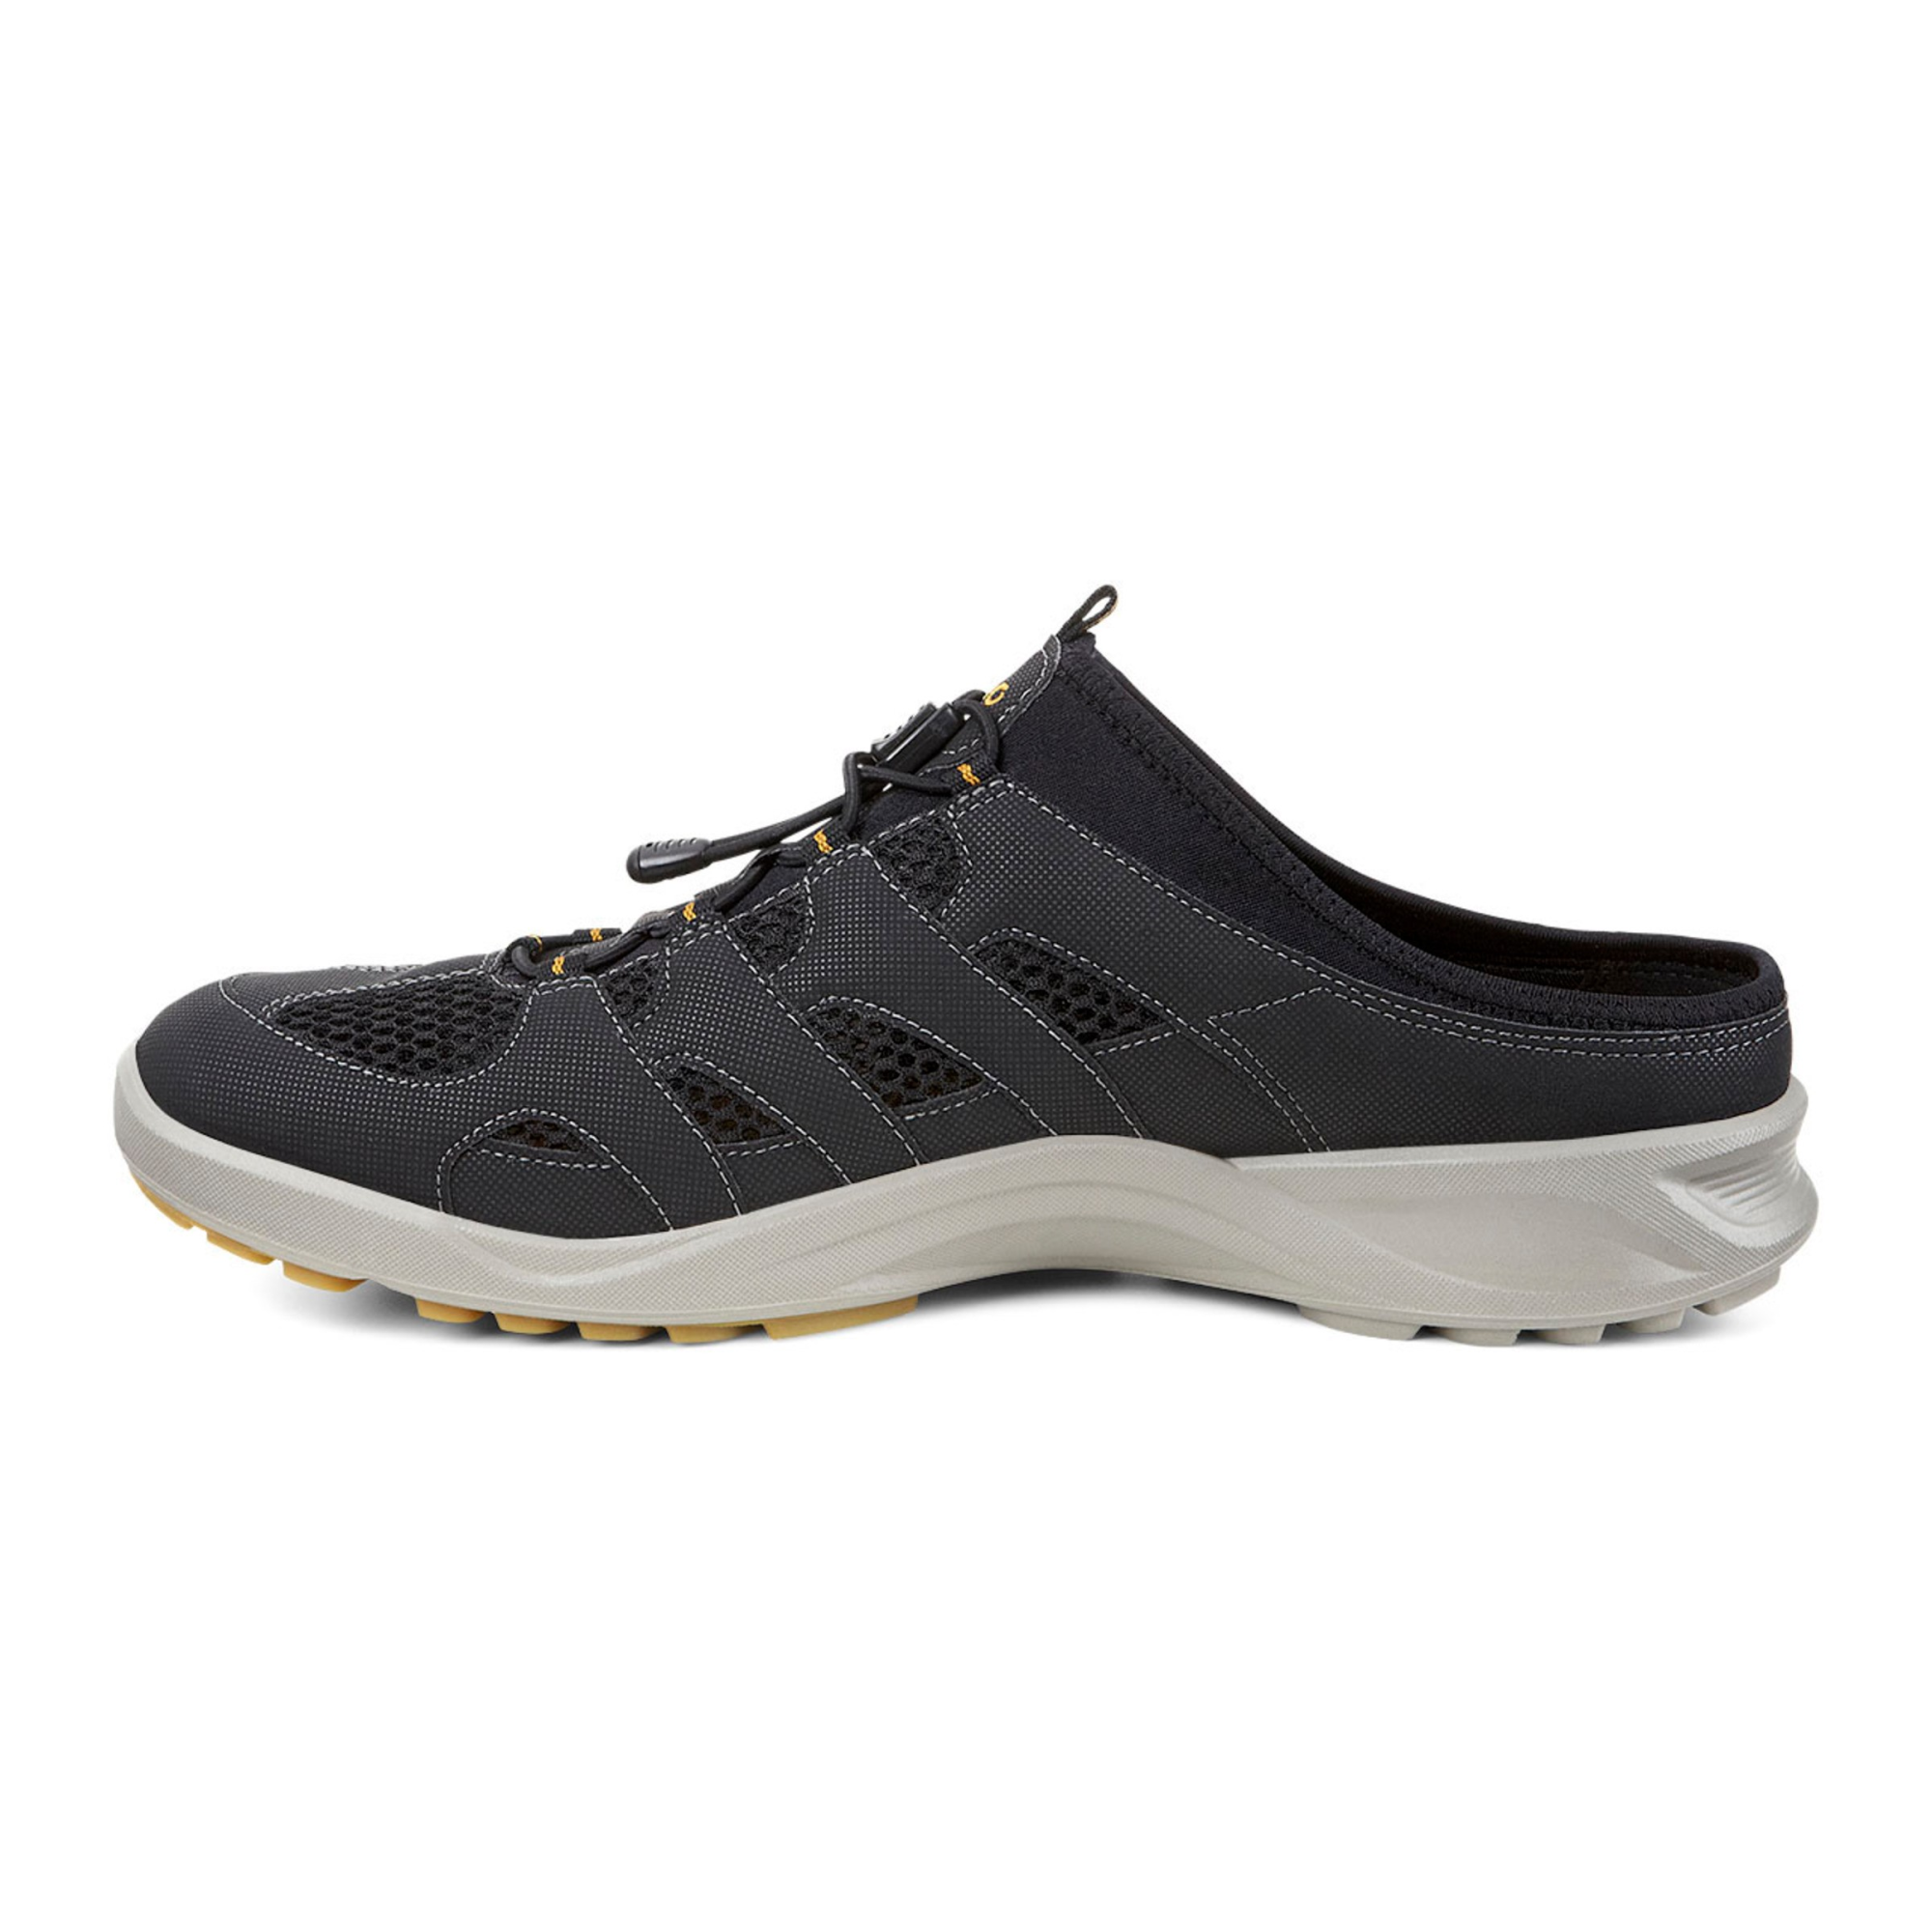 Ecco Mens Terracruise Slide 39 - Products Veryk Mall - Veryk Mall, many product, quick safe your money!